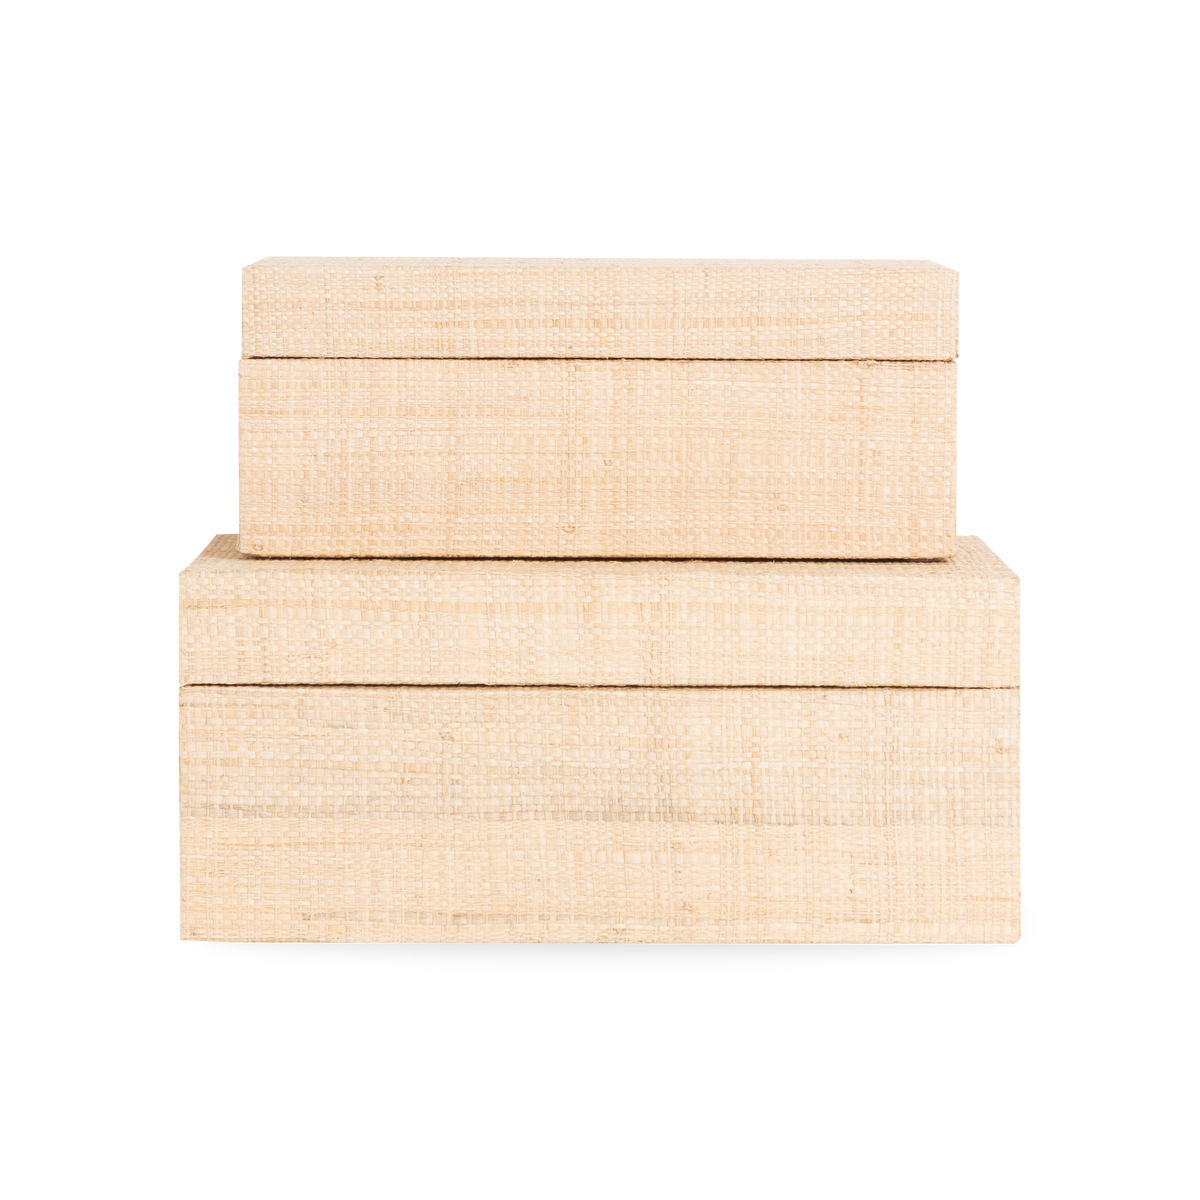 Characterized by its elegant grass cloth weaving and its straw palette, the Grasscloth Box introduces a natural atmosphere to any countertop.